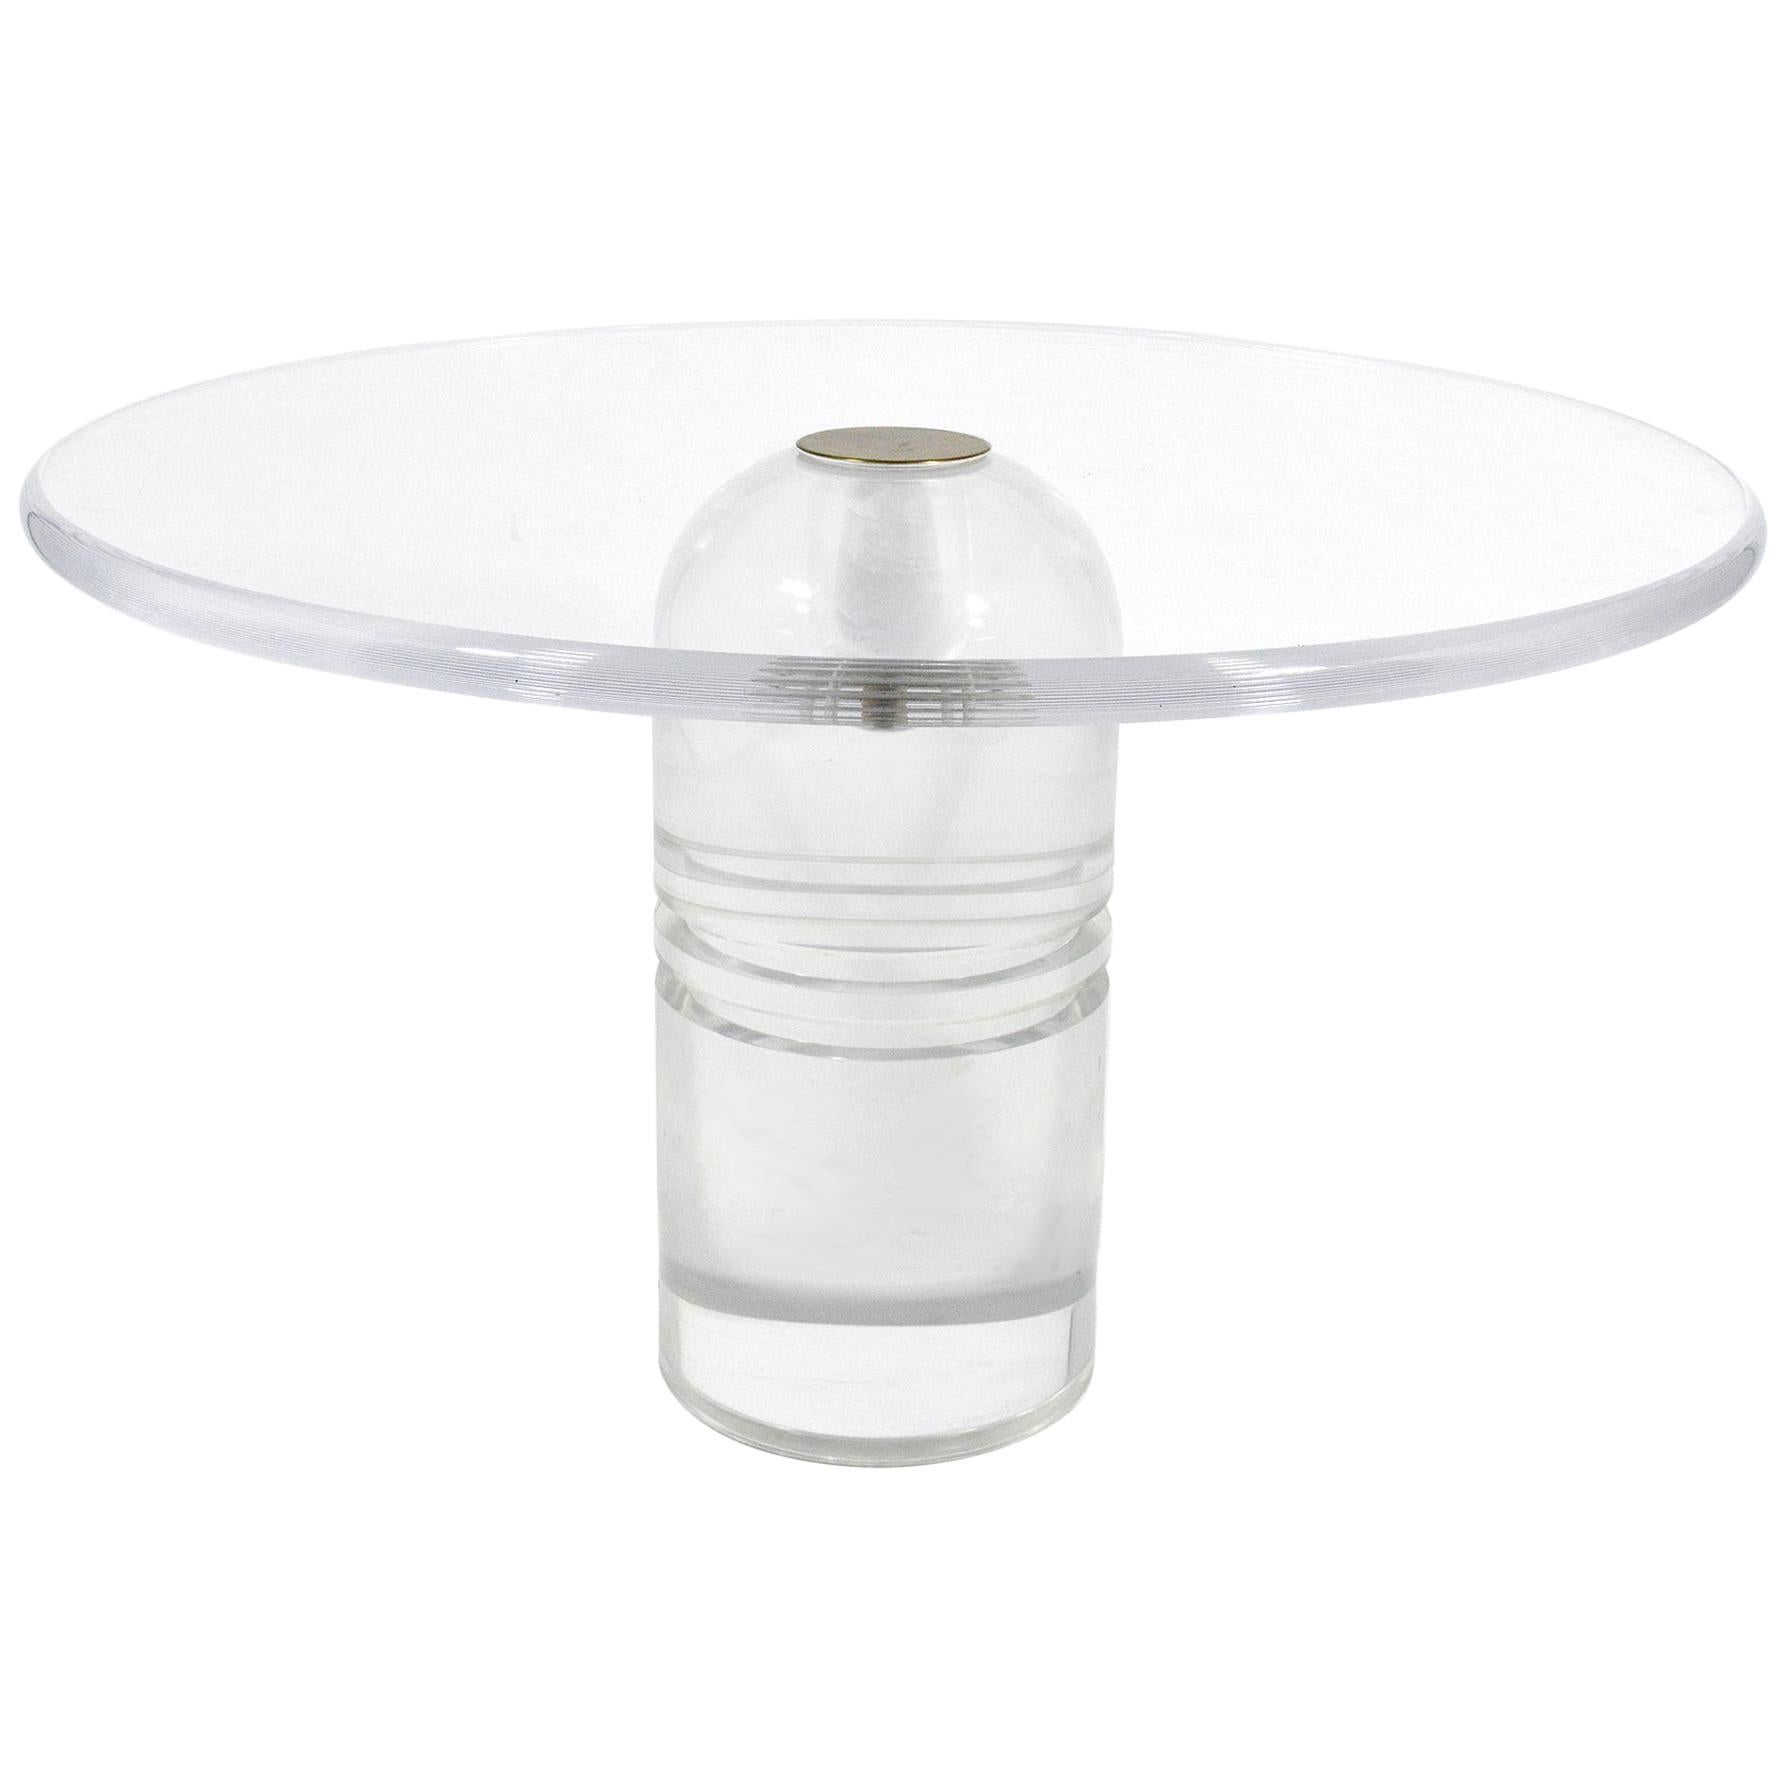 Charles Hollis Jones "Le Dome" Table For Sale